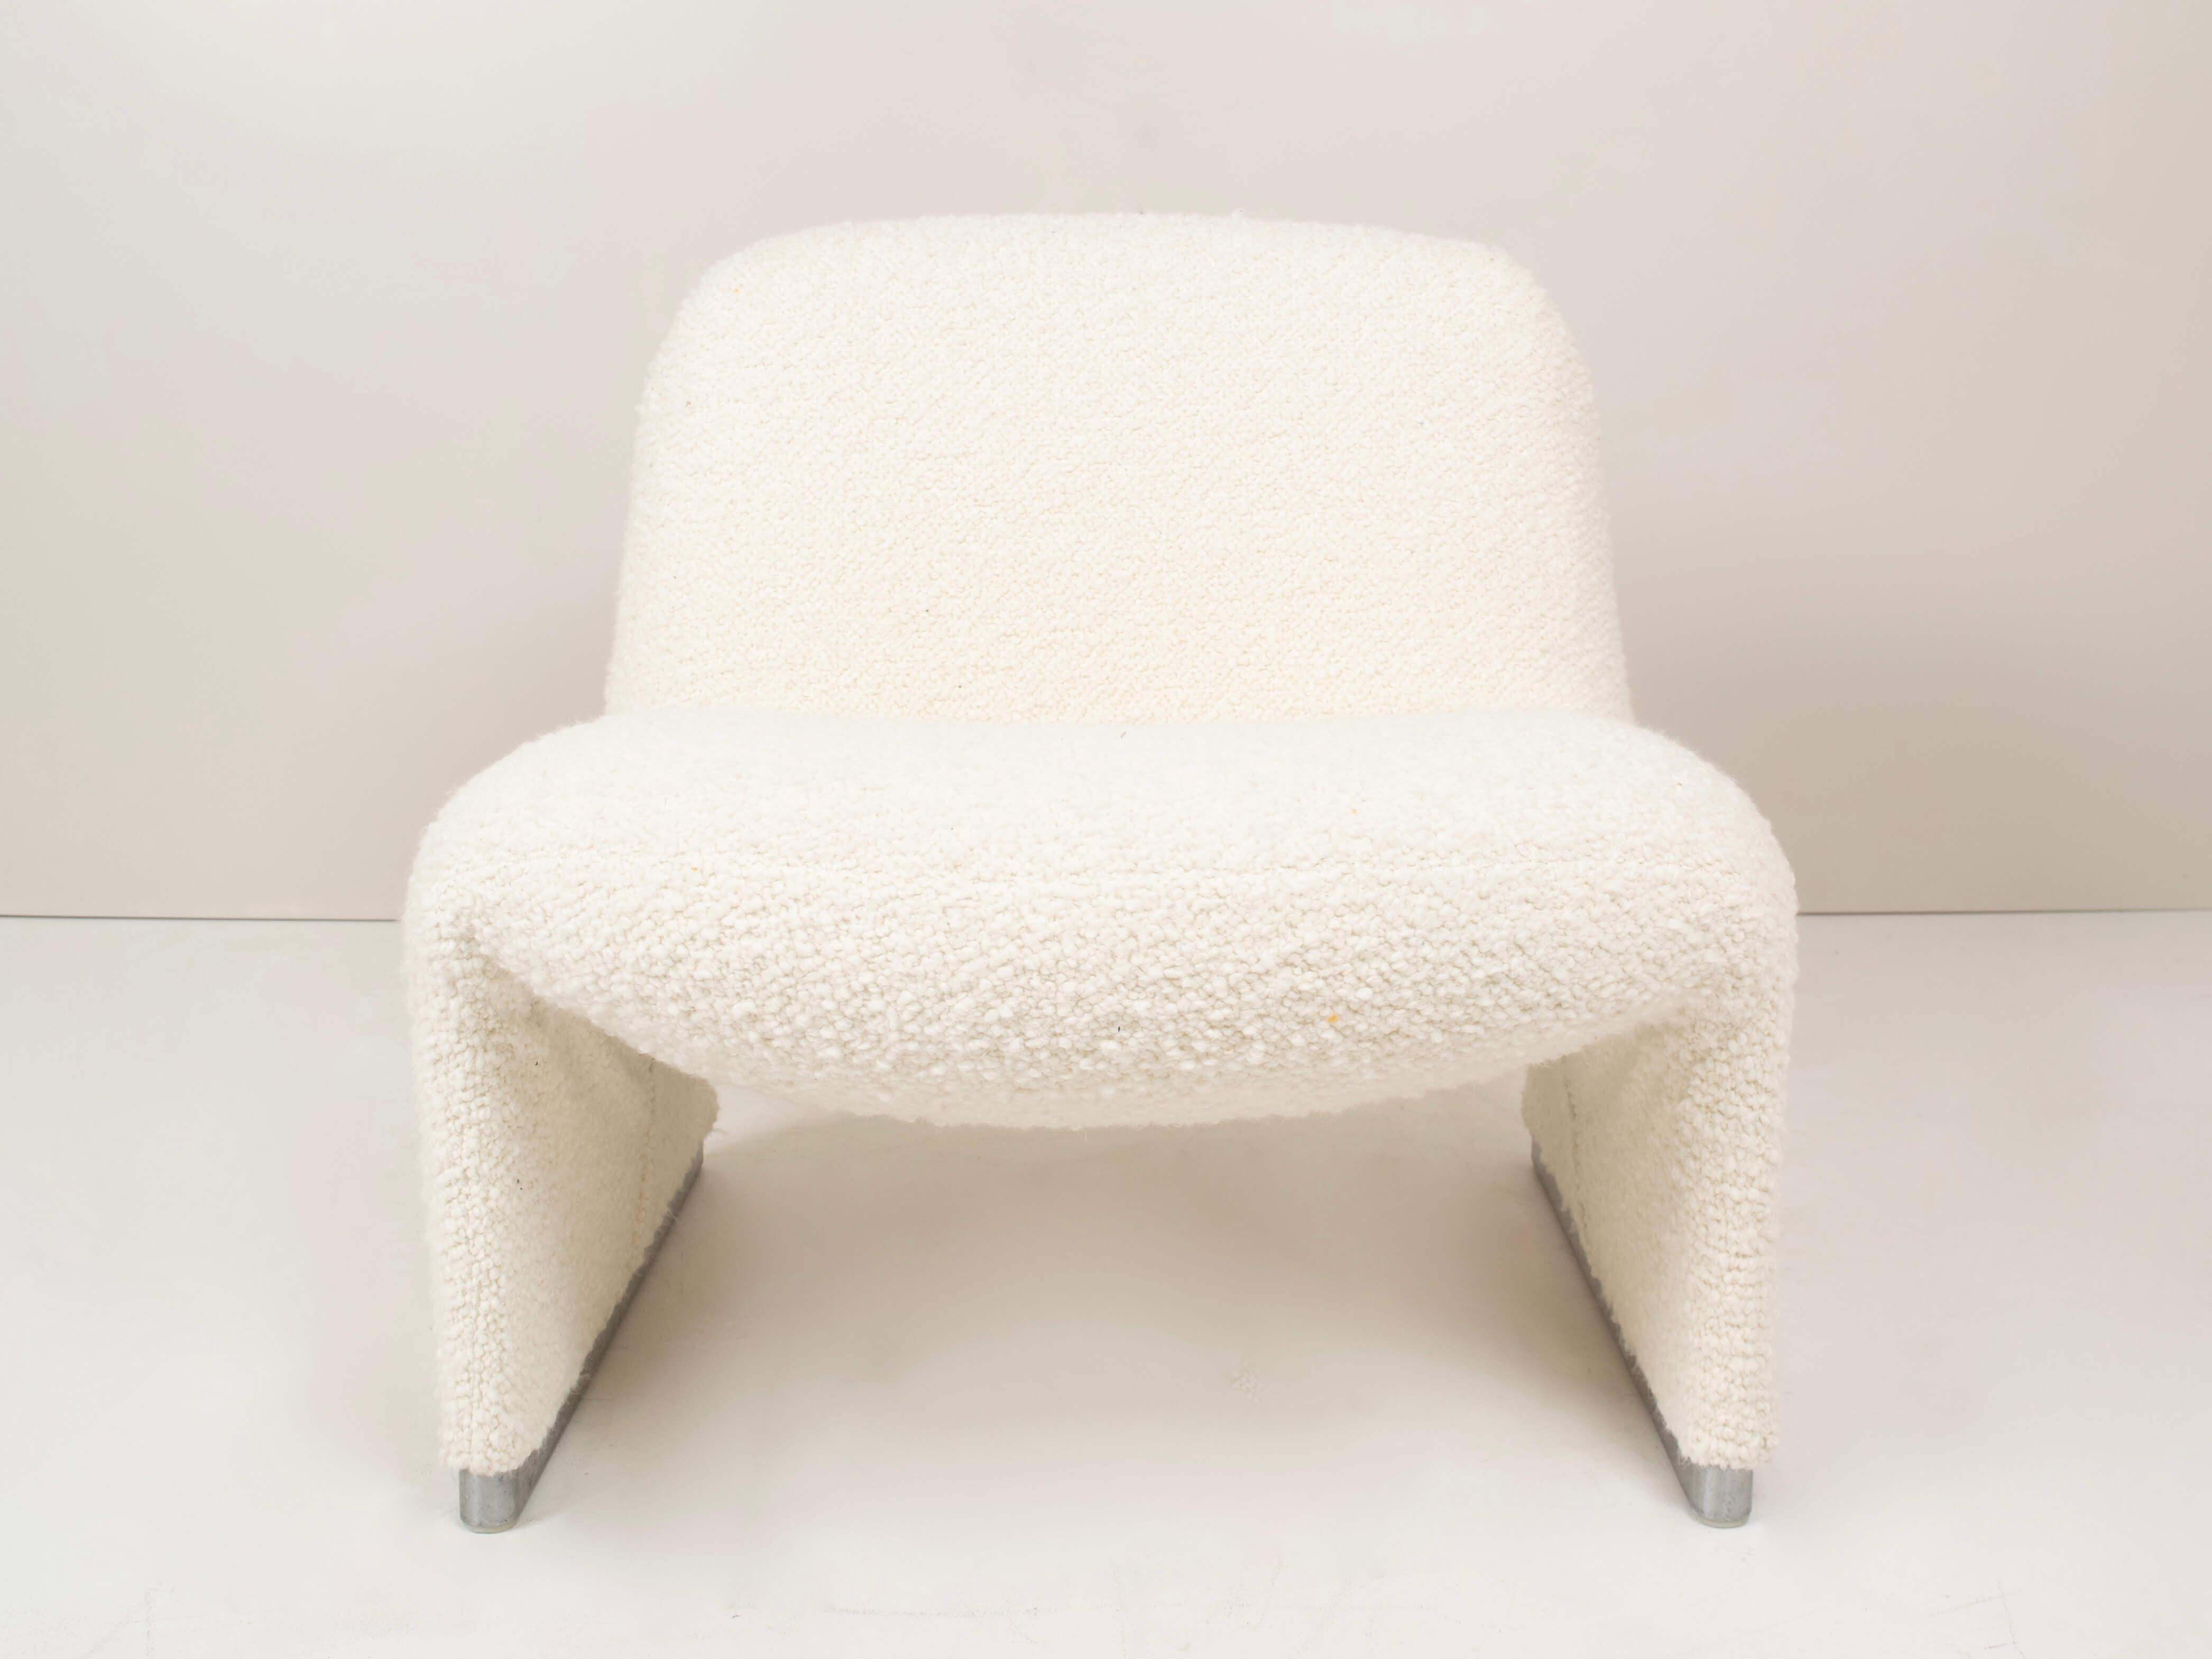 Very stylish Alky chair by Giancarlo Piretti for Artifort in Bouclé fabric. The chair has an aluminum frame with a chrome foot. The shape is organic and minimal. Completely new upholstered and in great condition.